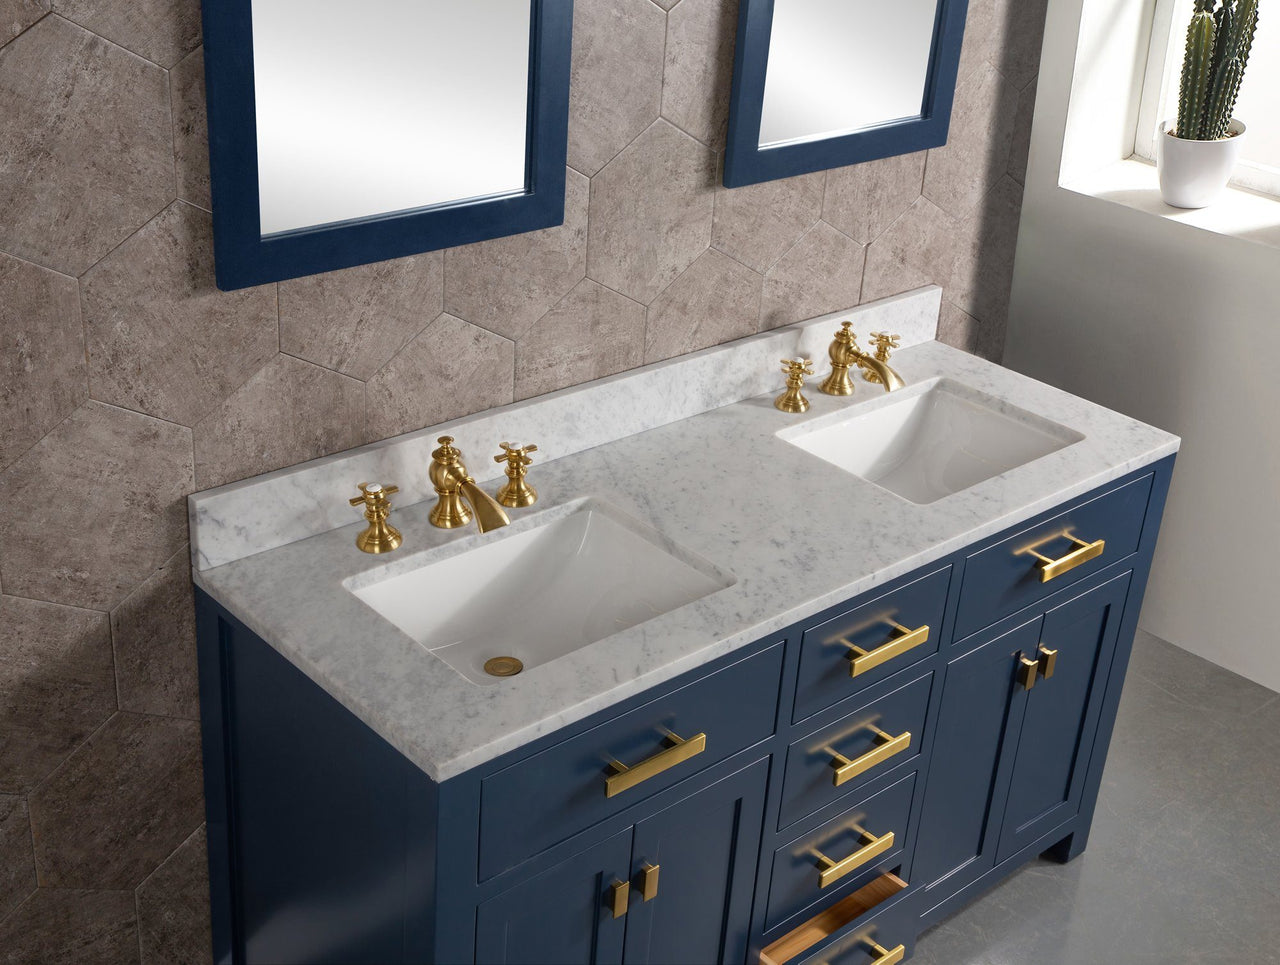 Madison 60-Inch Double Sink Carrara White Marble Vanity In Monarch BlueWith Matching Mirror(s) and F2-0013-06-FX Lavatory Faucet(s) Vanity Water Creation 